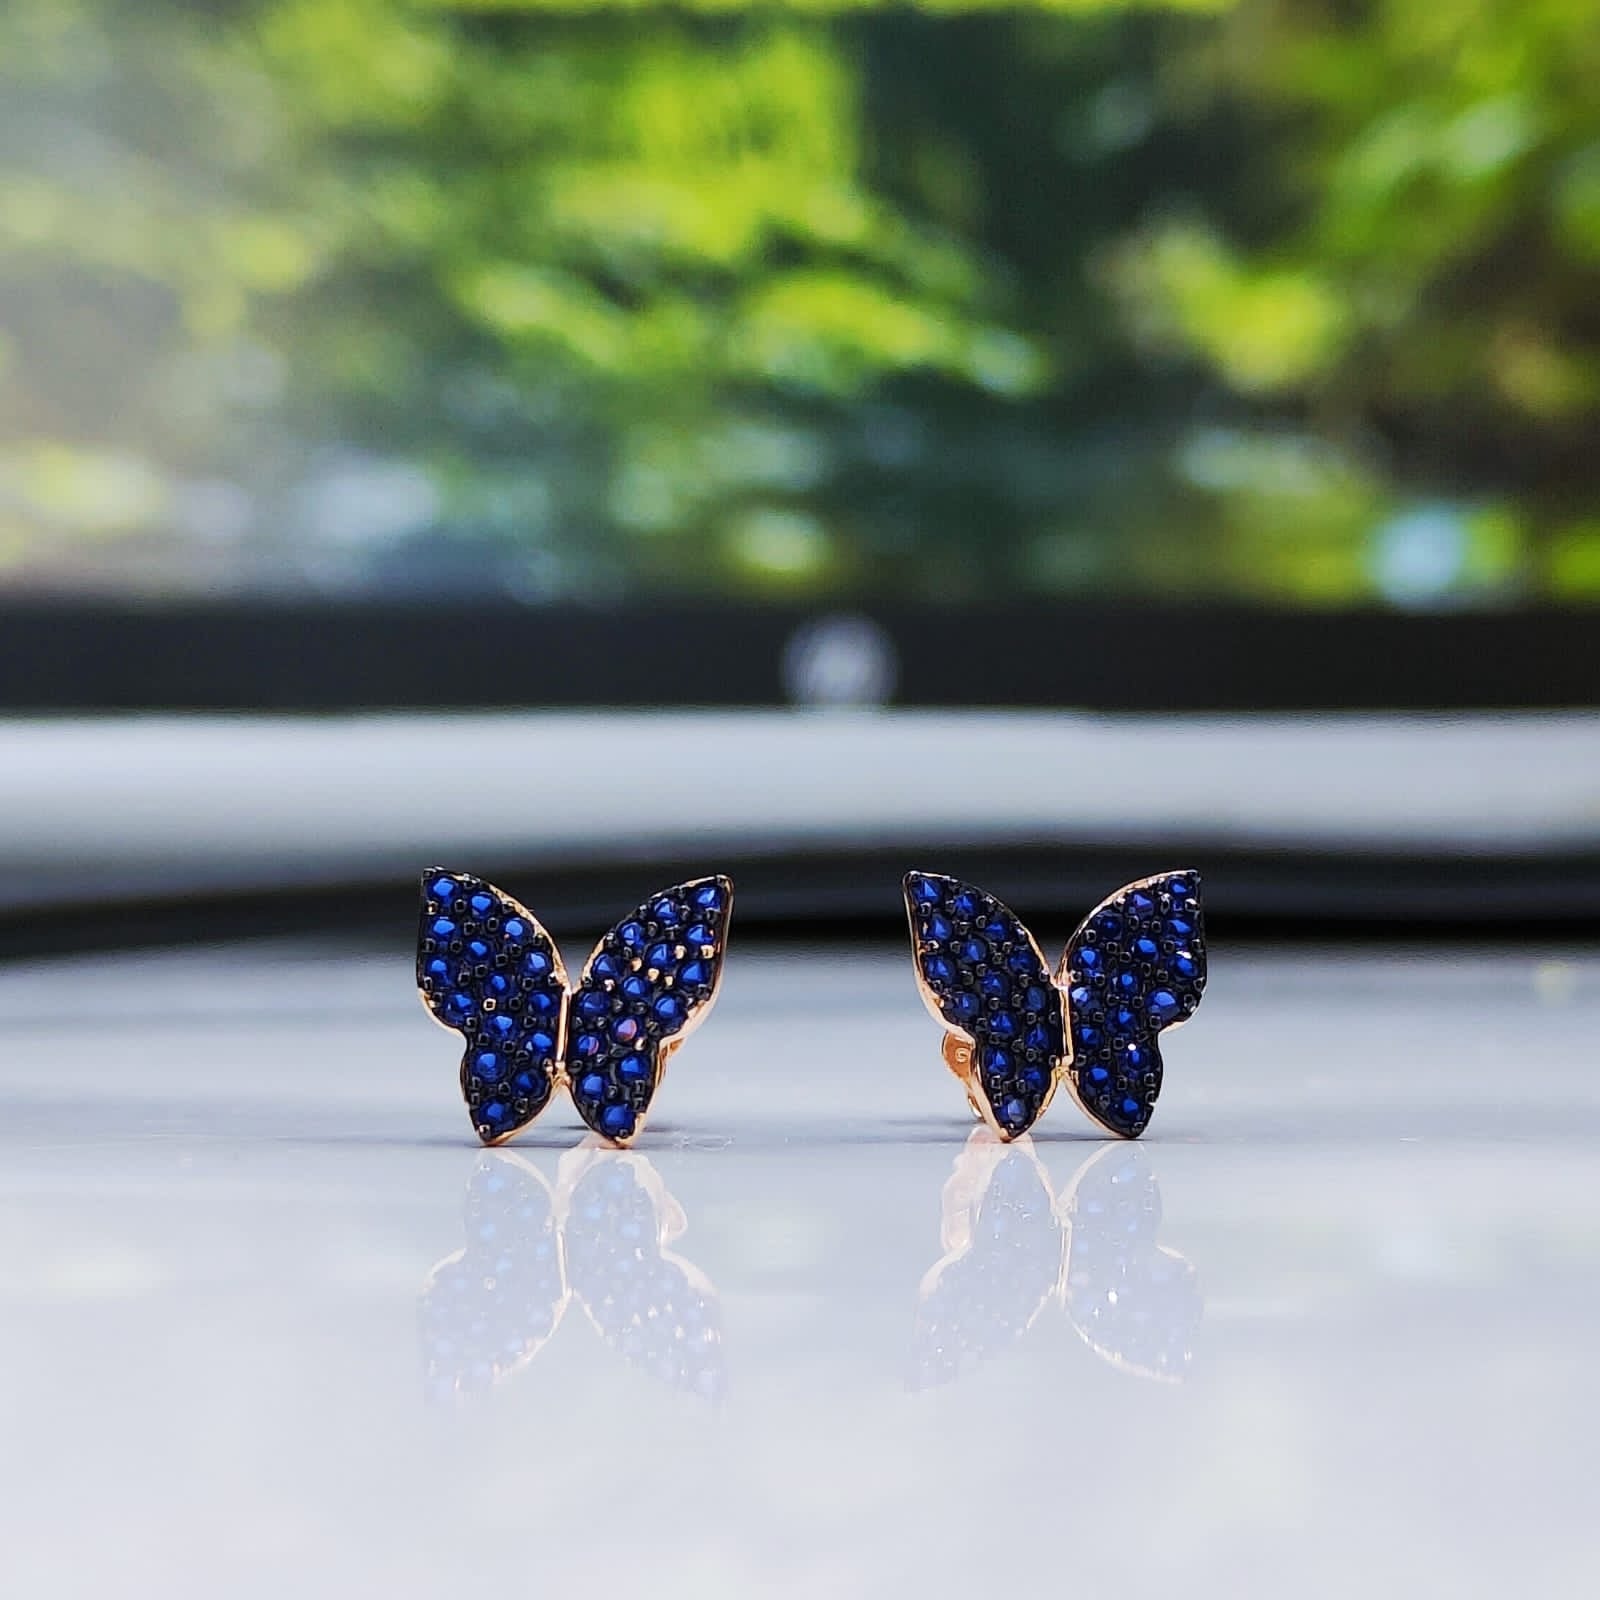 Sterling Silver Butterfly earrings. Stud Post Blue Opal wings Earrings, Bug  Jewelry, Fast Free Shipping. Rhodium plated. gift for her - Jewelry Network  Inc